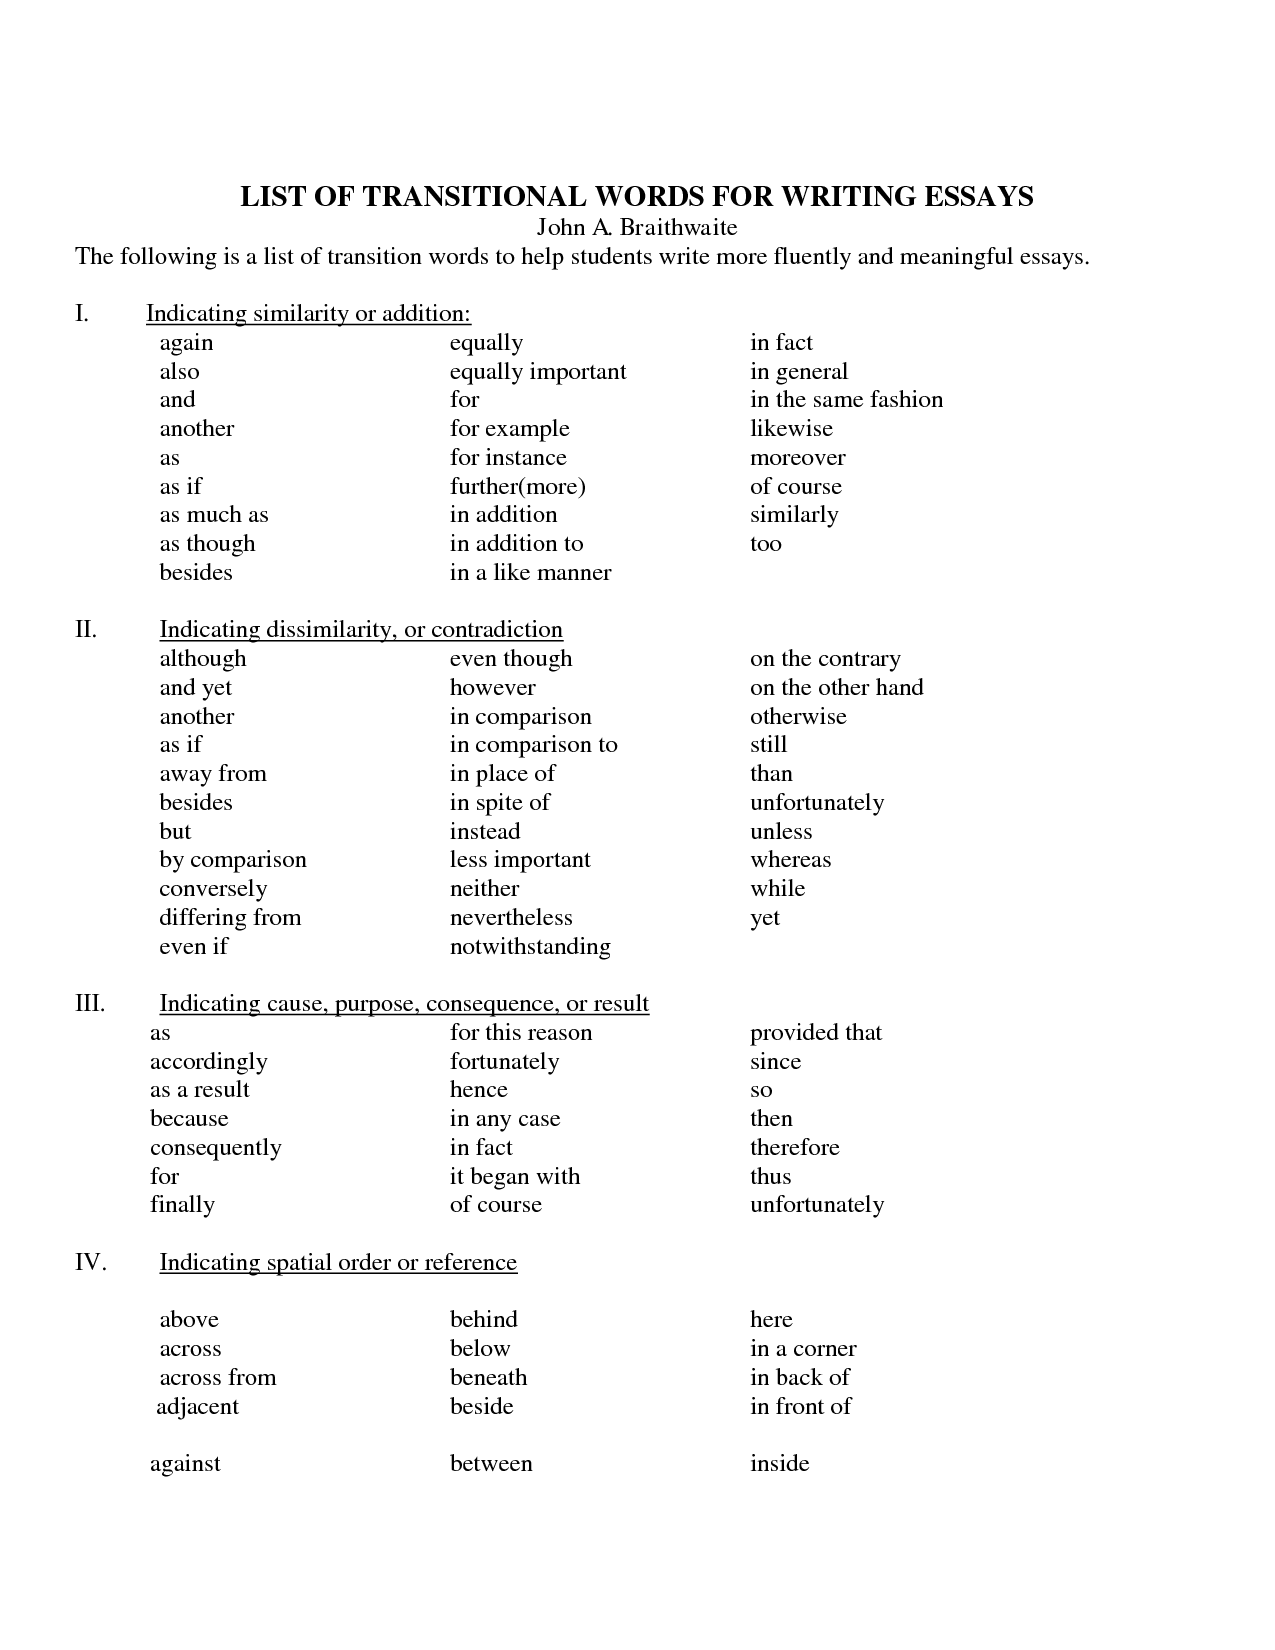 Transition Words in French for essays?